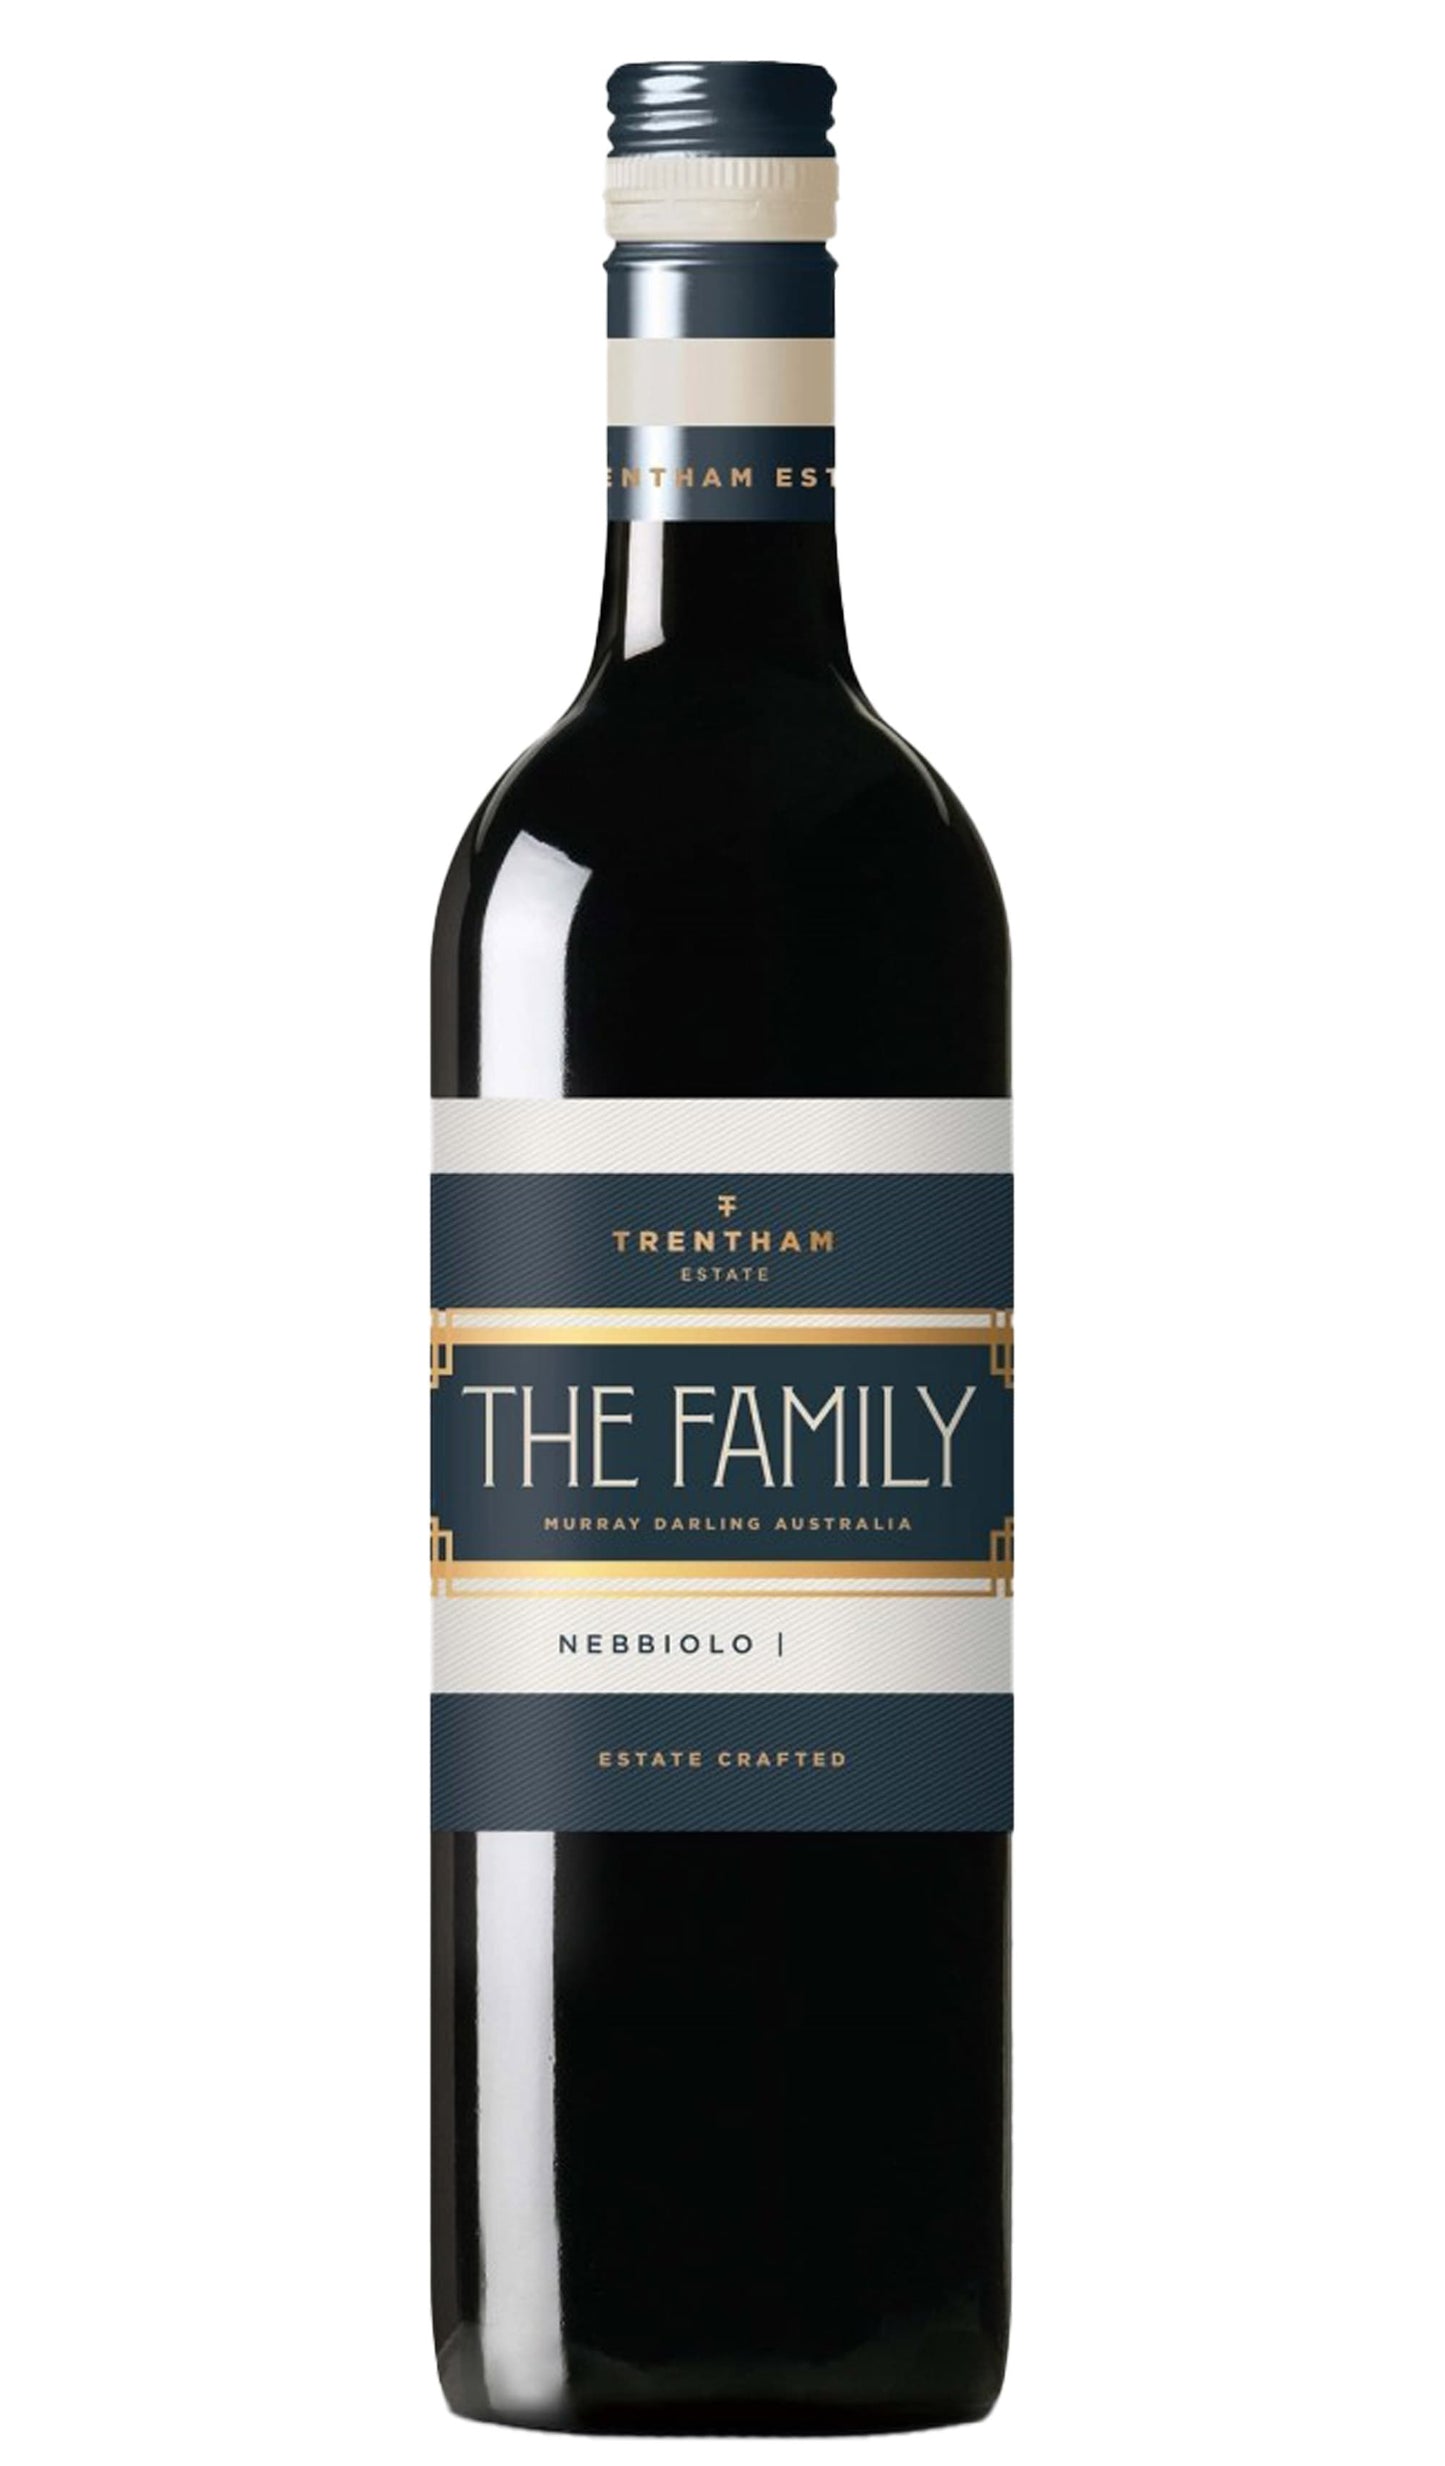 Find out more or buy Trentham Estate The Family Nebbiolo 2022 (Murray Darling) online at Wine Sellers Direct - Australia’s independent liquor specialists.